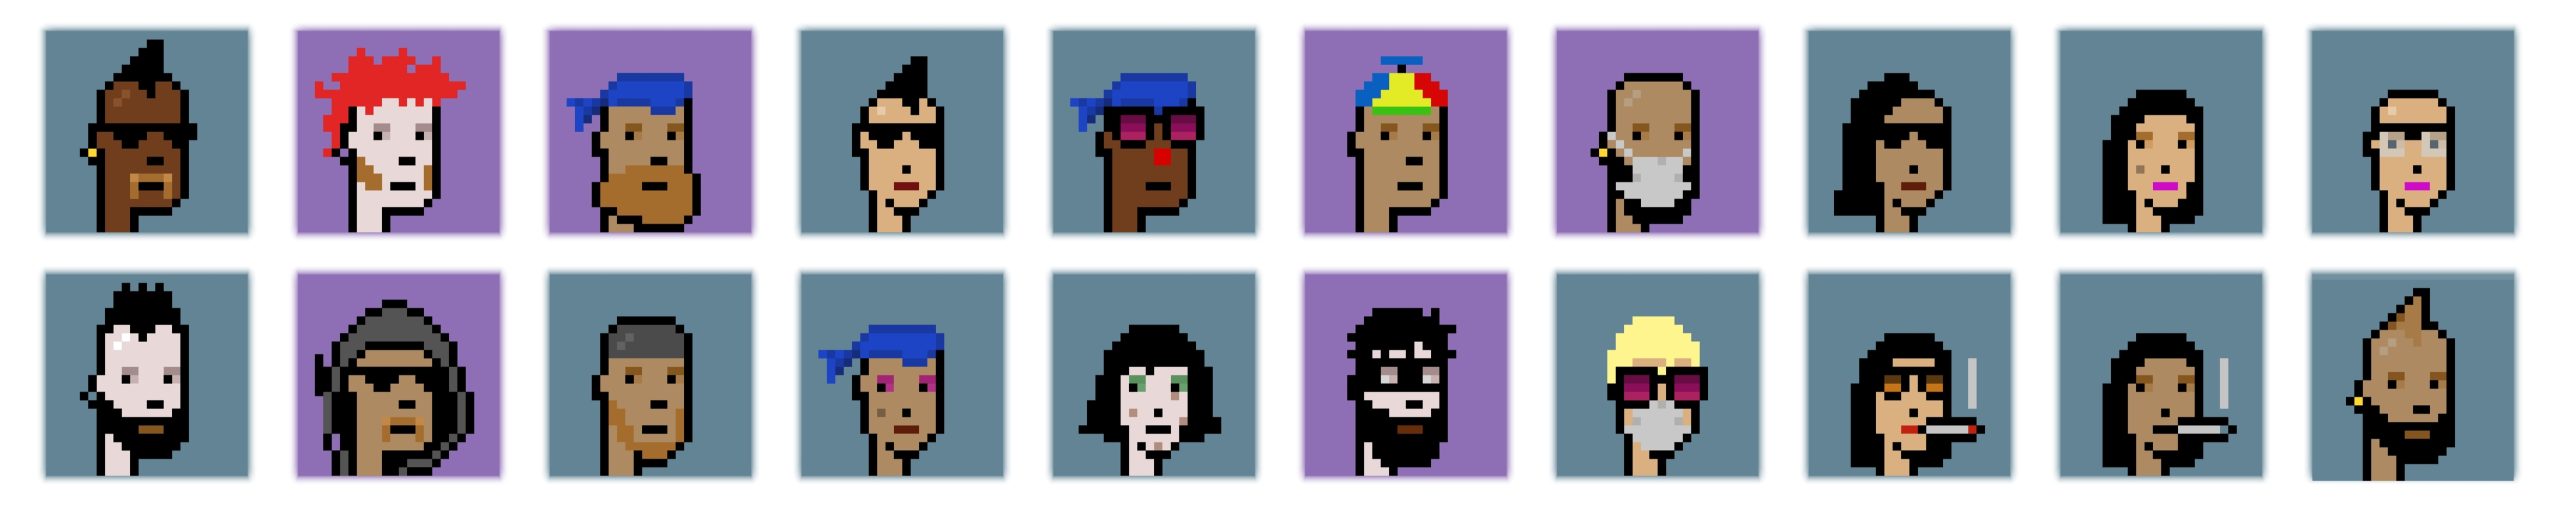 Yuga Labs Officially Releases IP Rights Tied to Cryptopunks, Meebits NFTs — Galaxy Digital Report Criticizes BAYC License